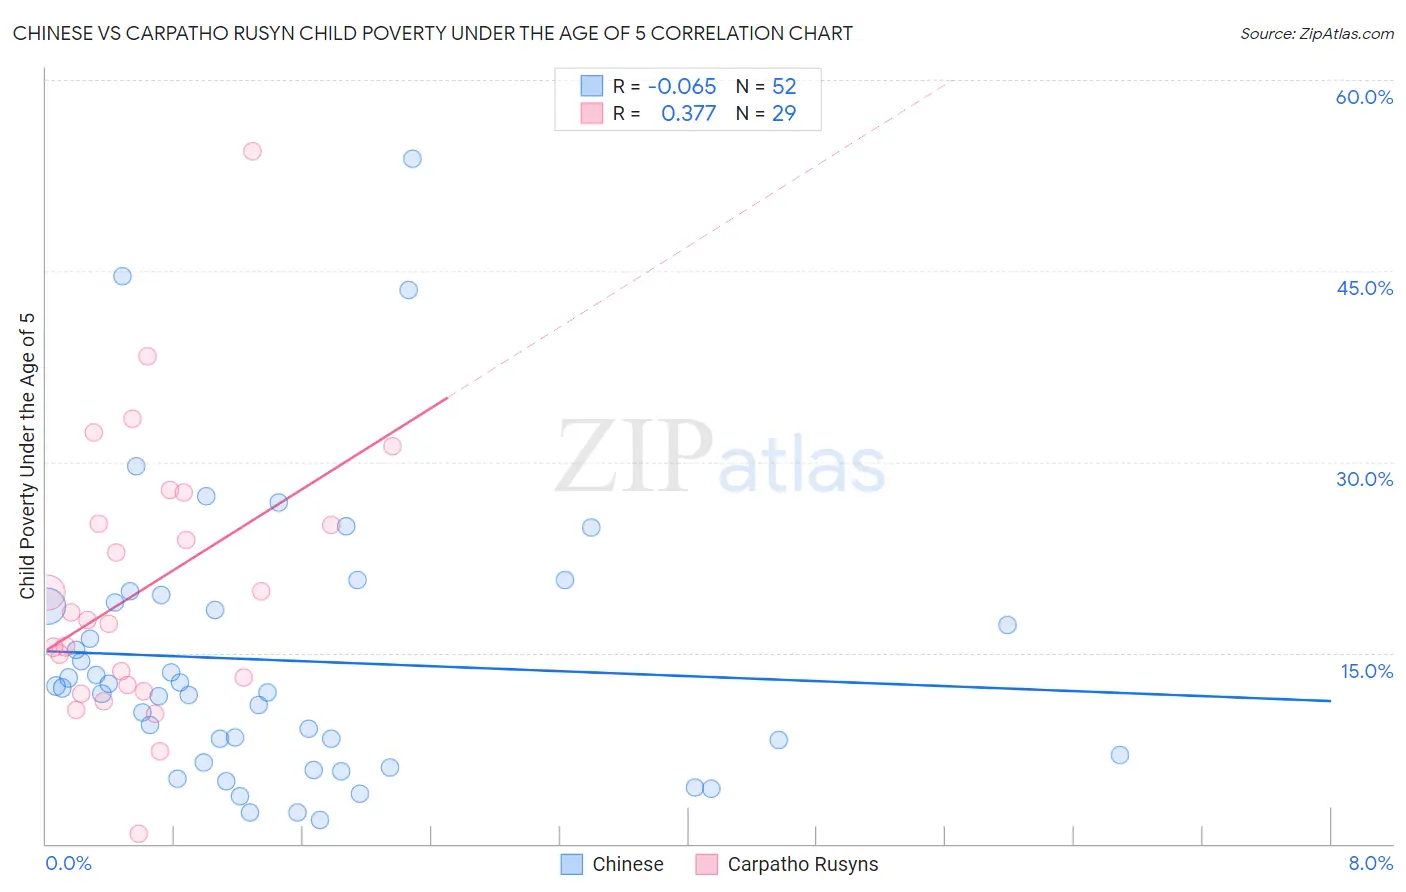 Chinese vs Carpatho Rusyn Child Poverty Under the Age of 5